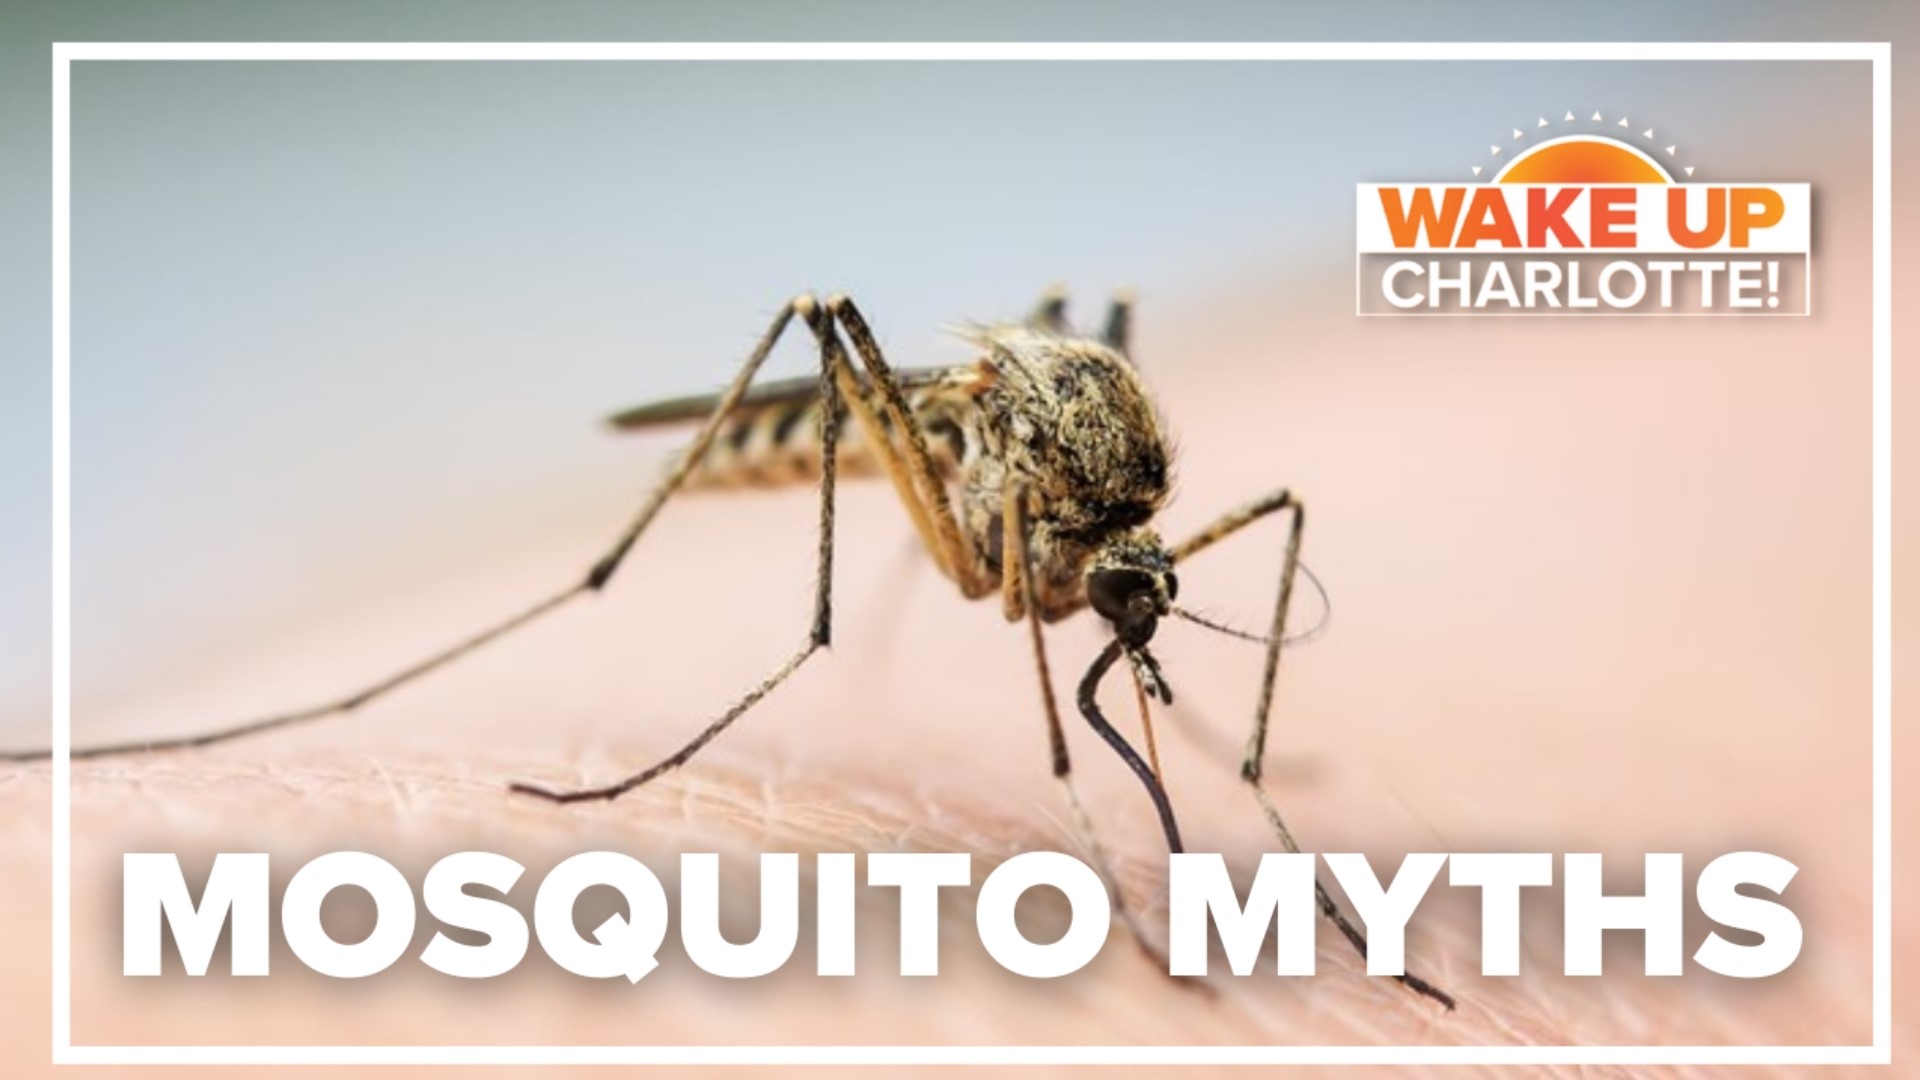 As warmer weather rolls in and rain expect to see more mosquitoes. We are going through some common myths about mosquitoes.